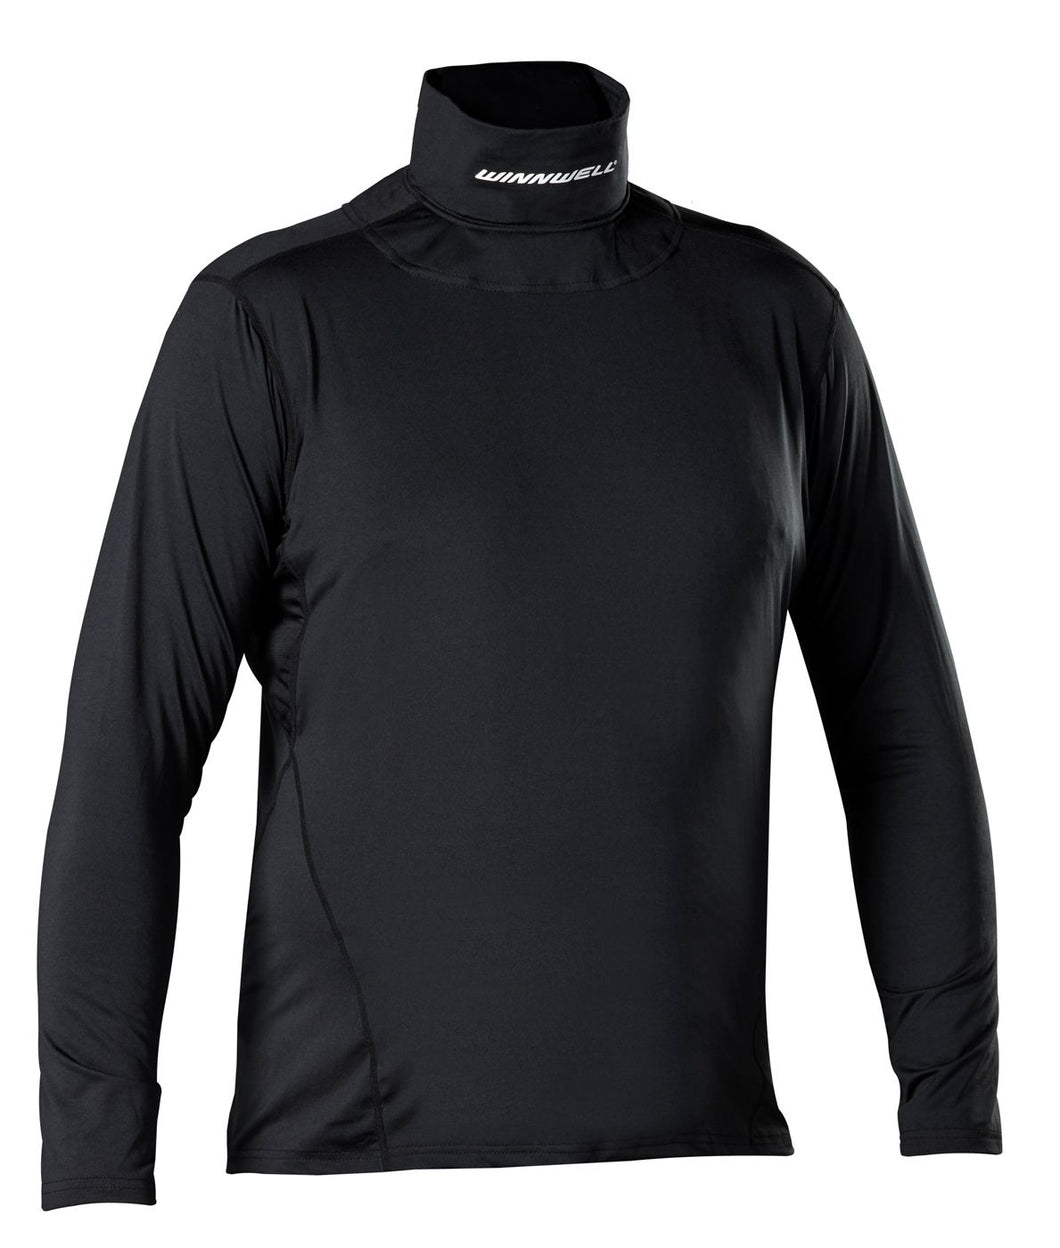 Base Layer Top w/ Built-in Neck Guard